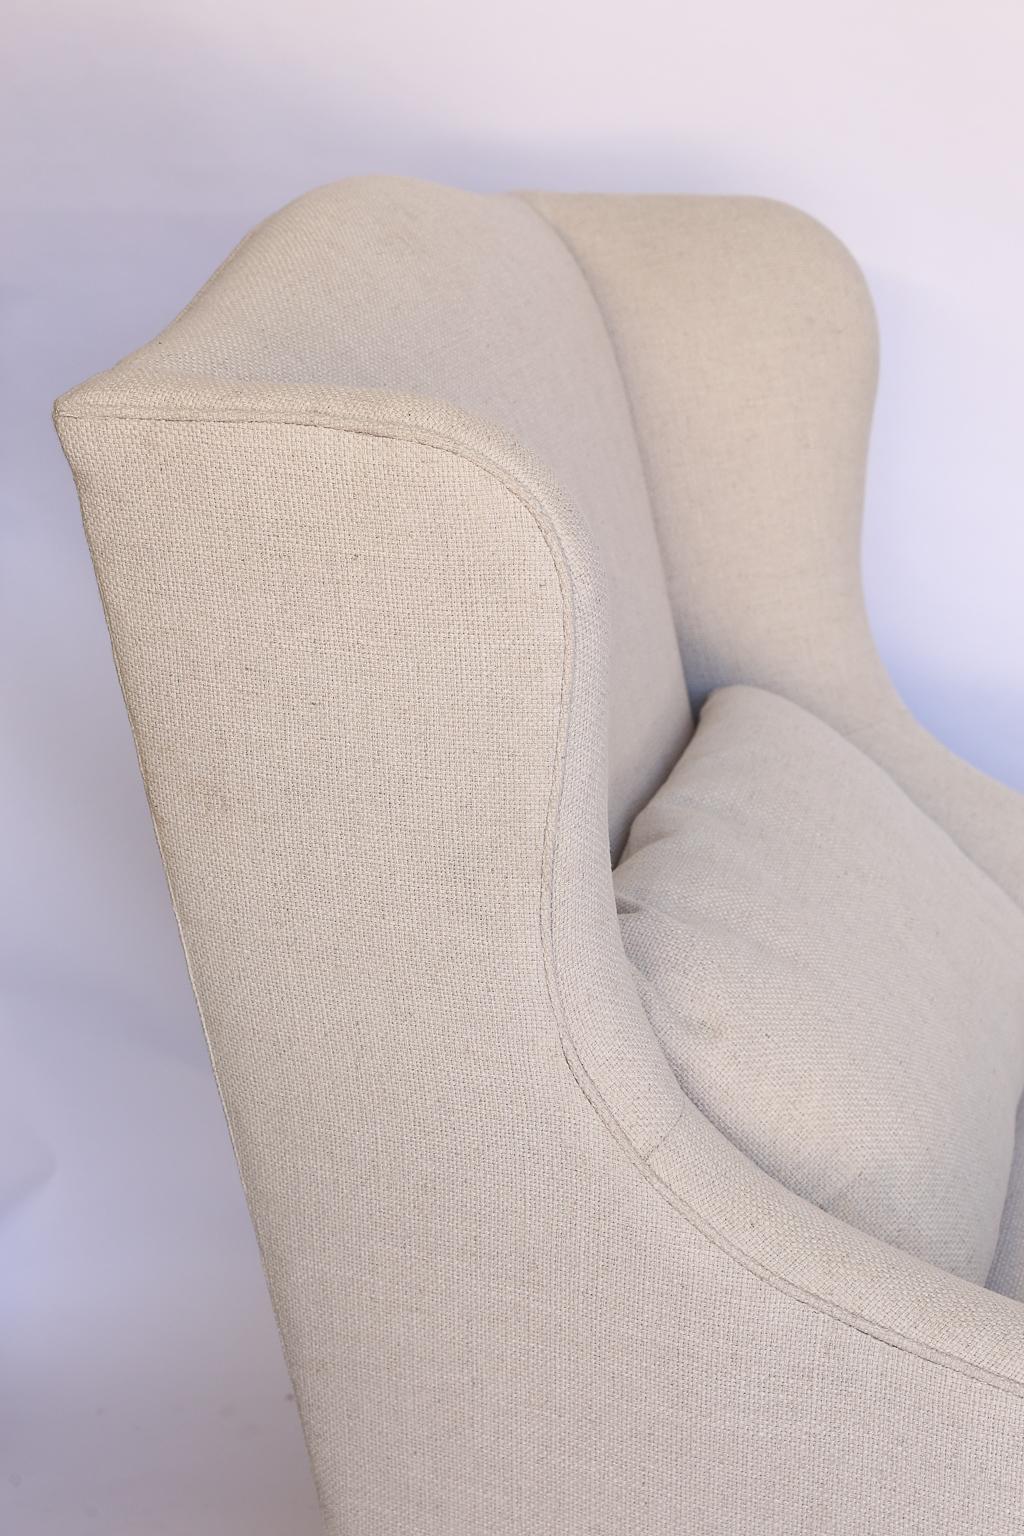 Found in France, this is a pair of French mutton leg, Os de Mouton, wingback armchairs. The chairs have been newly upholstered, with new padding and fill, in an off-white linen blend fabric. The chairs feature a wide seat and have curved side wings